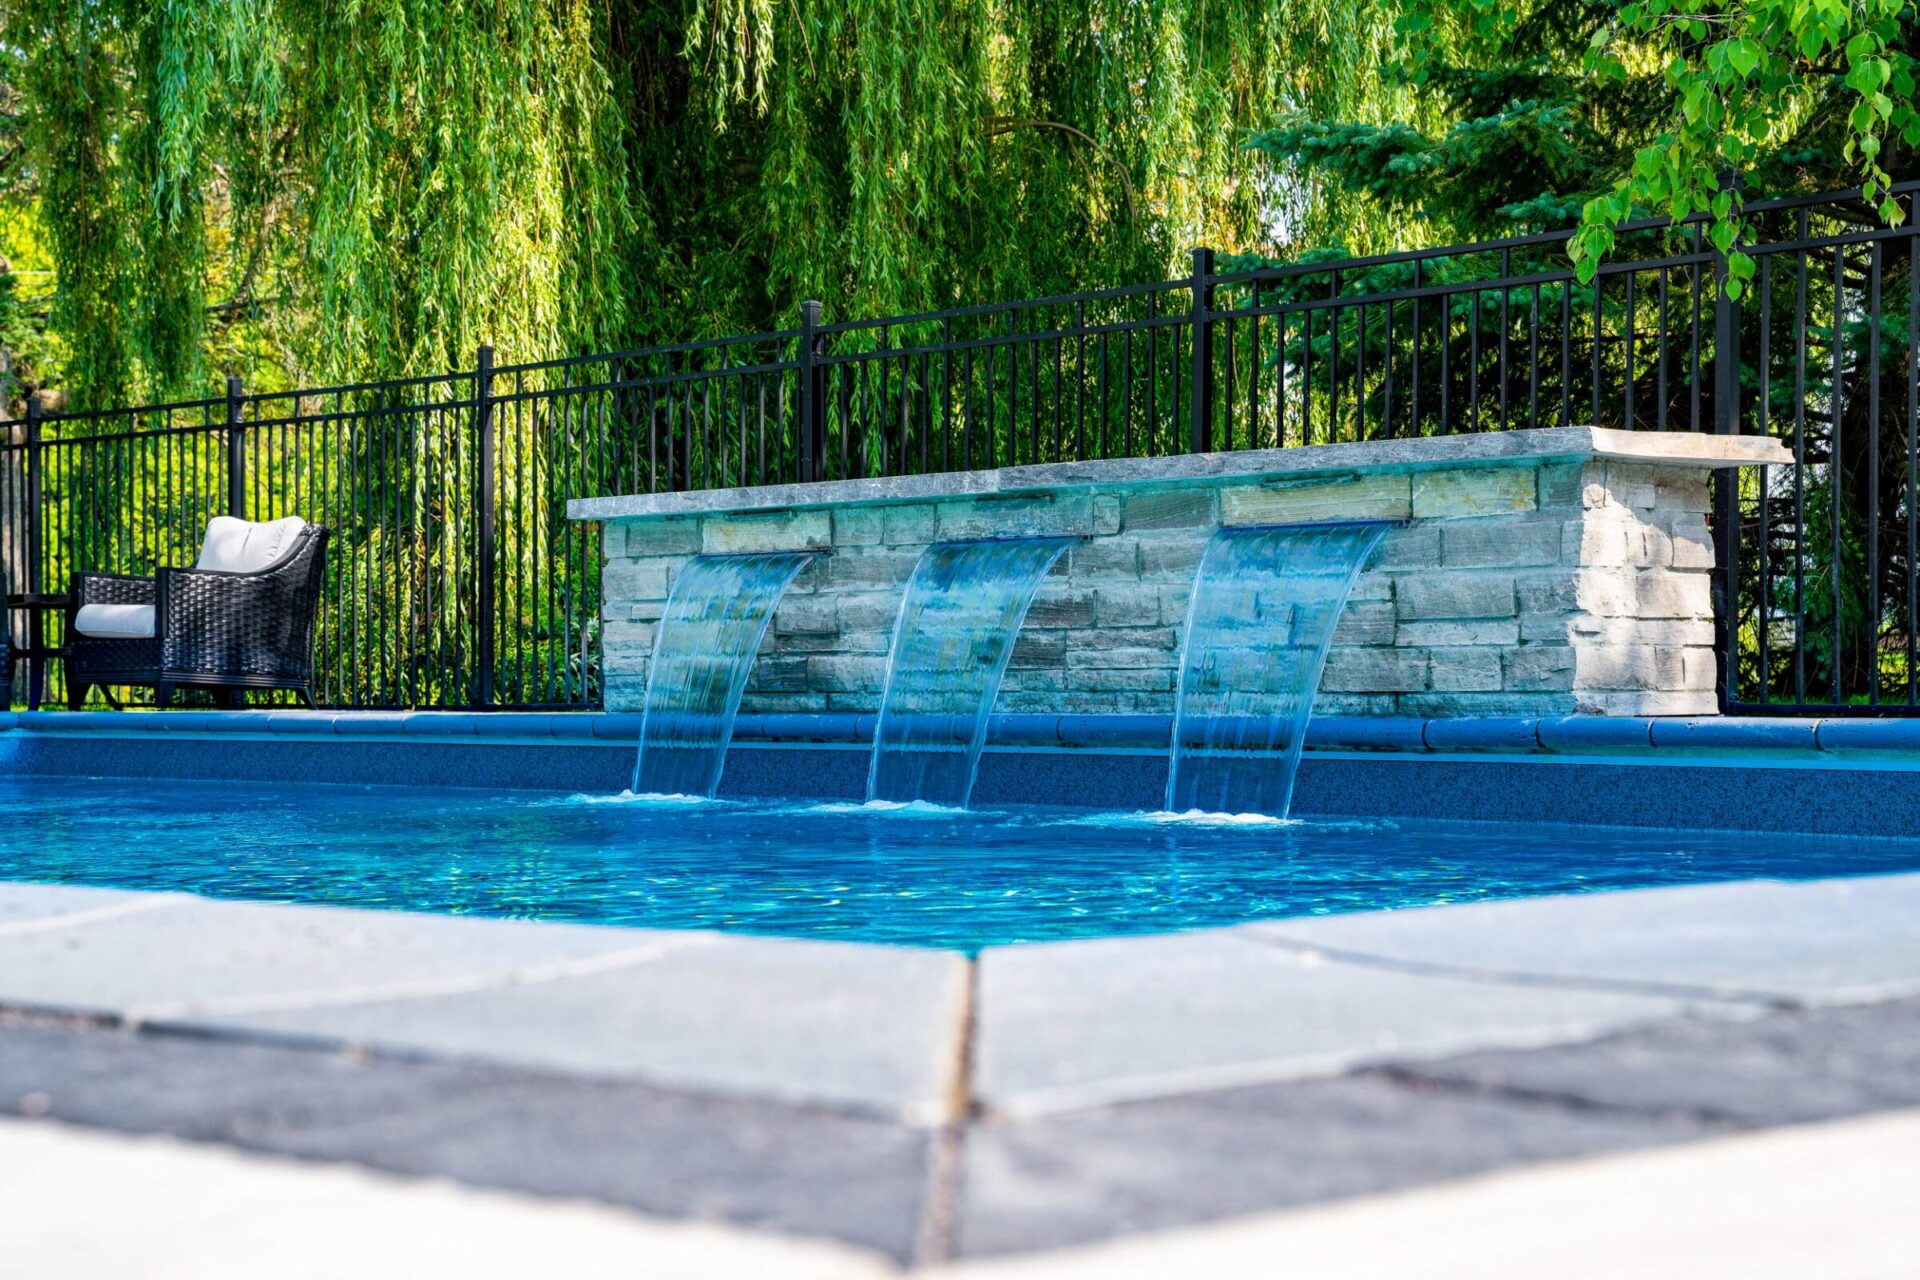 An inviting outdoor swimming pool with a cascading stone waterfall feature, surrounded by lush greenery and a single woven chair beside a metal fence.